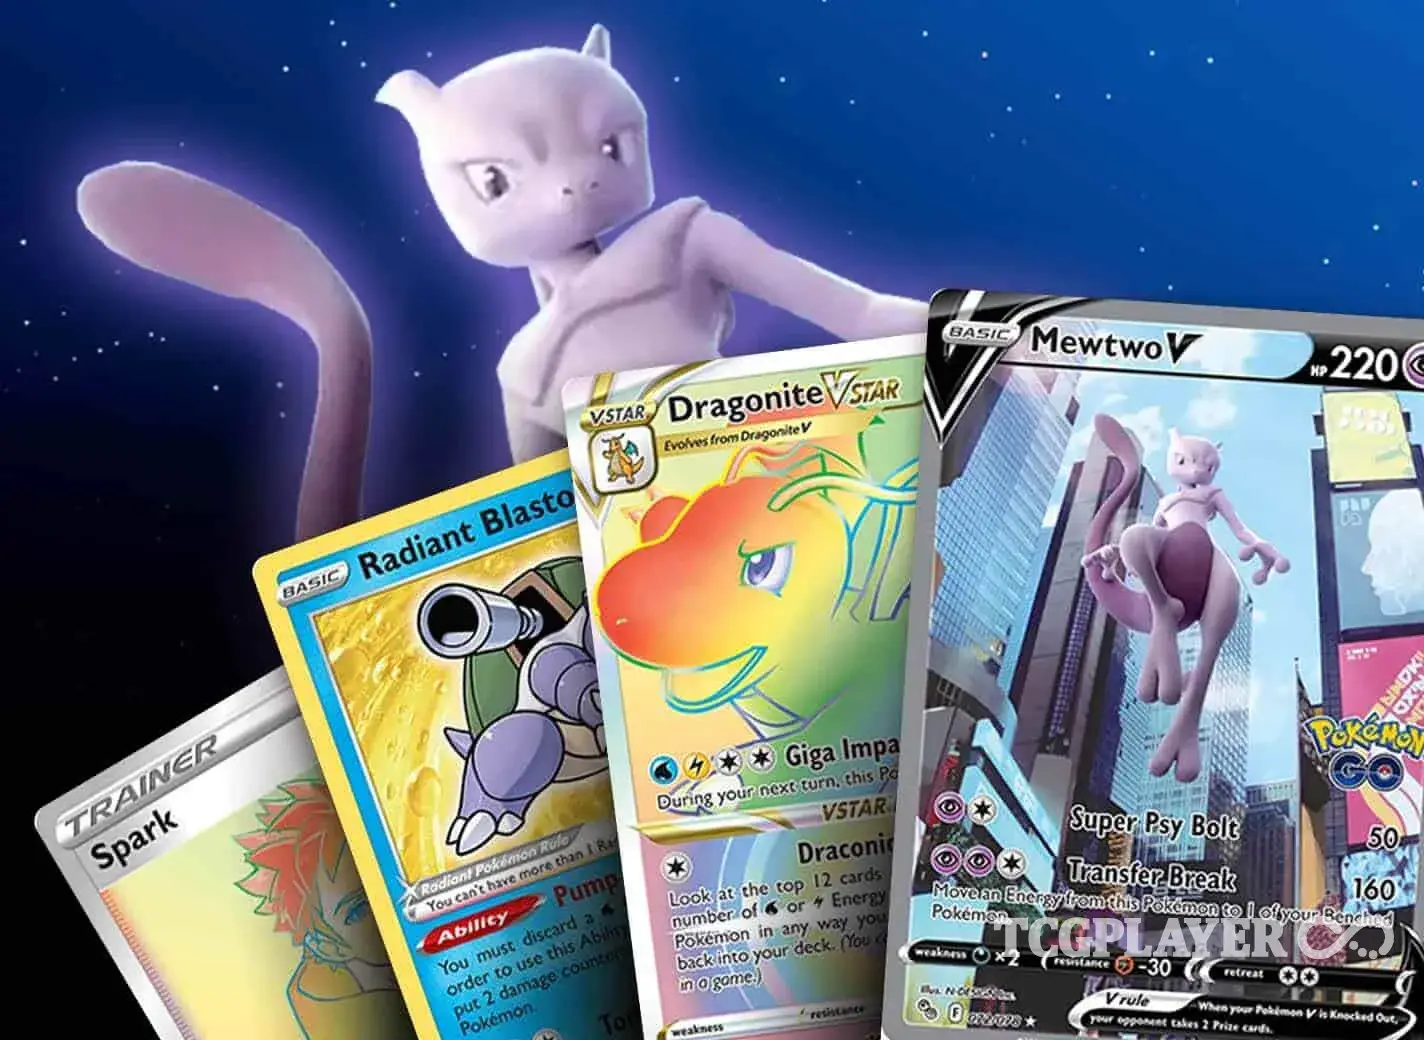 Revealing eBay’s Secrets in Pokemon TCG Sales: Most Sought-After Cards, Top Sales and More